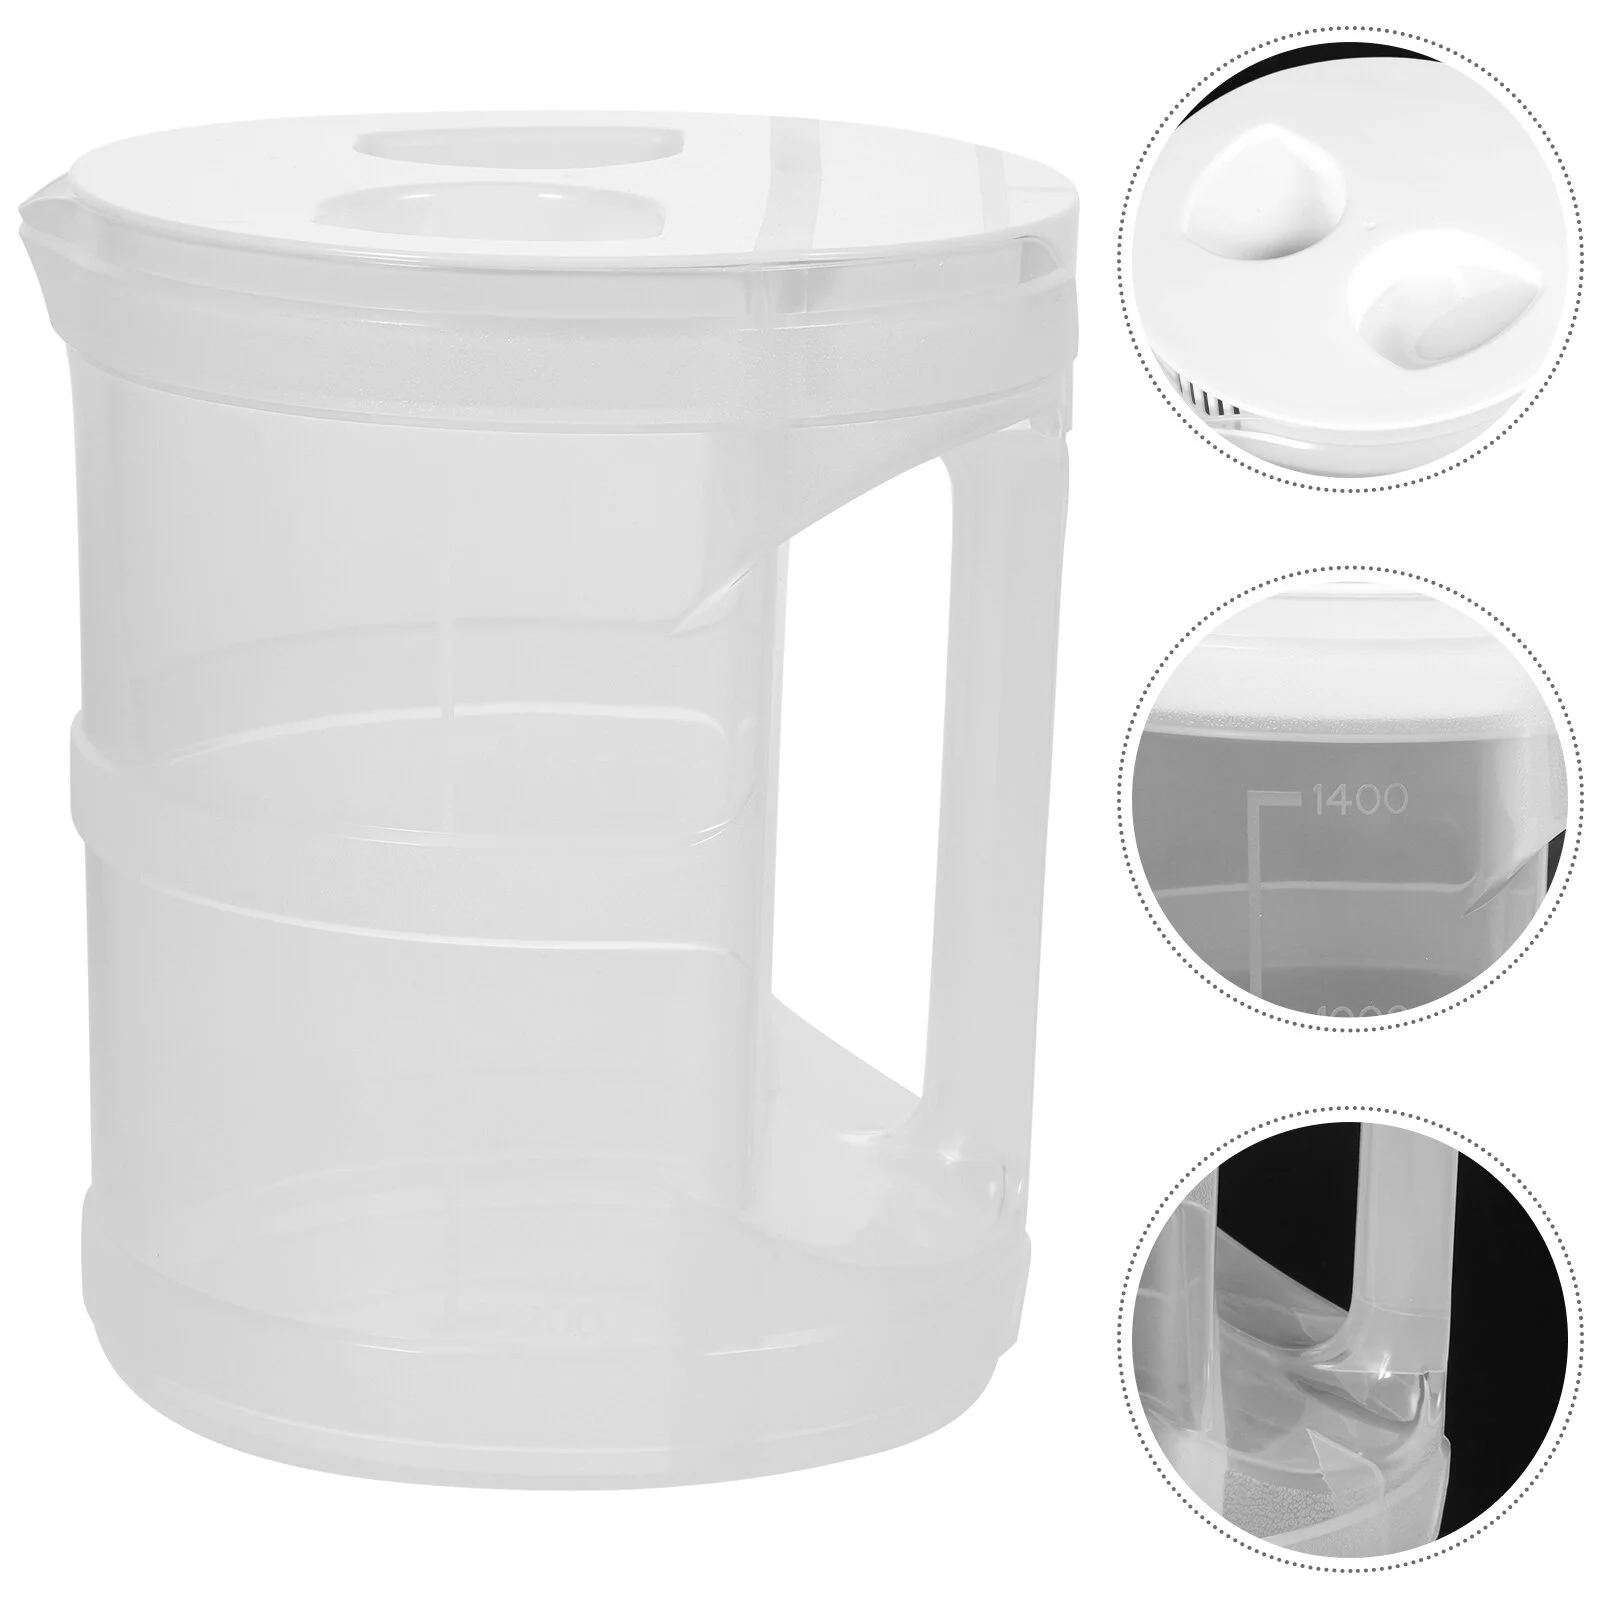 

Cold Water Bottle Plastic Tea Pitcher Fridge With Lid Refrigerator Jug Pp Ice Beverage Pitchers For Juice Kettle Drinking